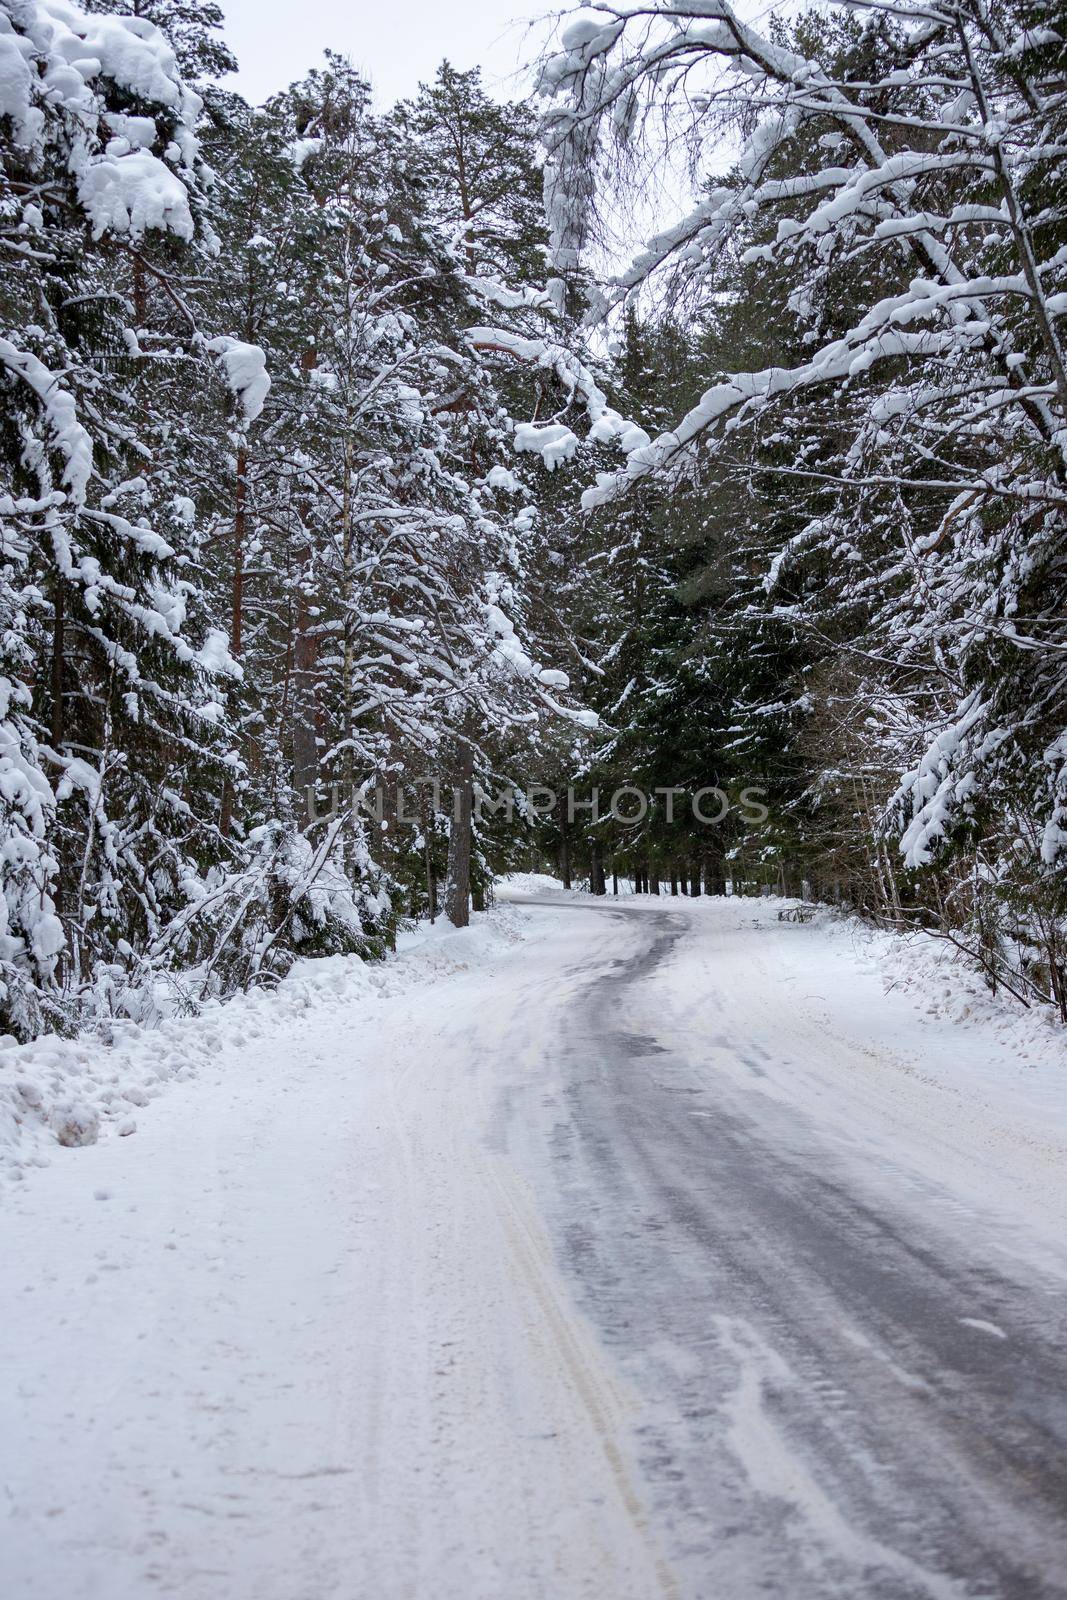 A picturesque winter road through a pine forest covered with snow after a snowfall